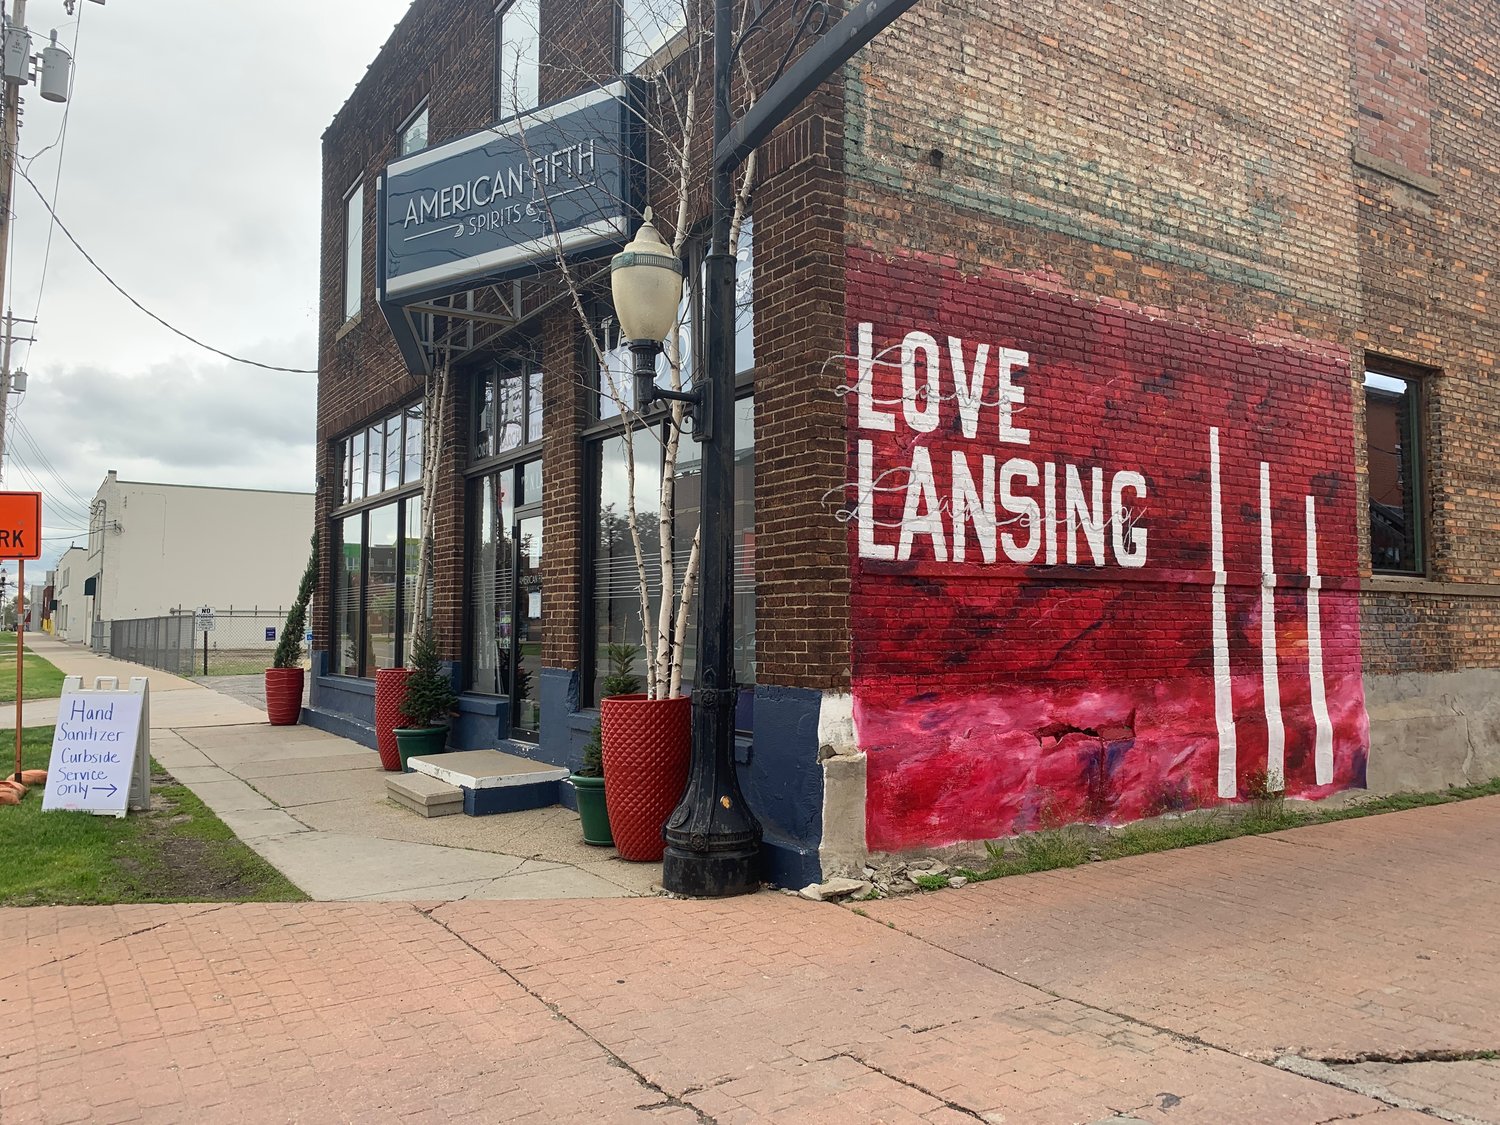 American Fifth Spirits,  112 N. Larch St., shows its love for Lansing. The bar and distillery sells hand sanitizer.